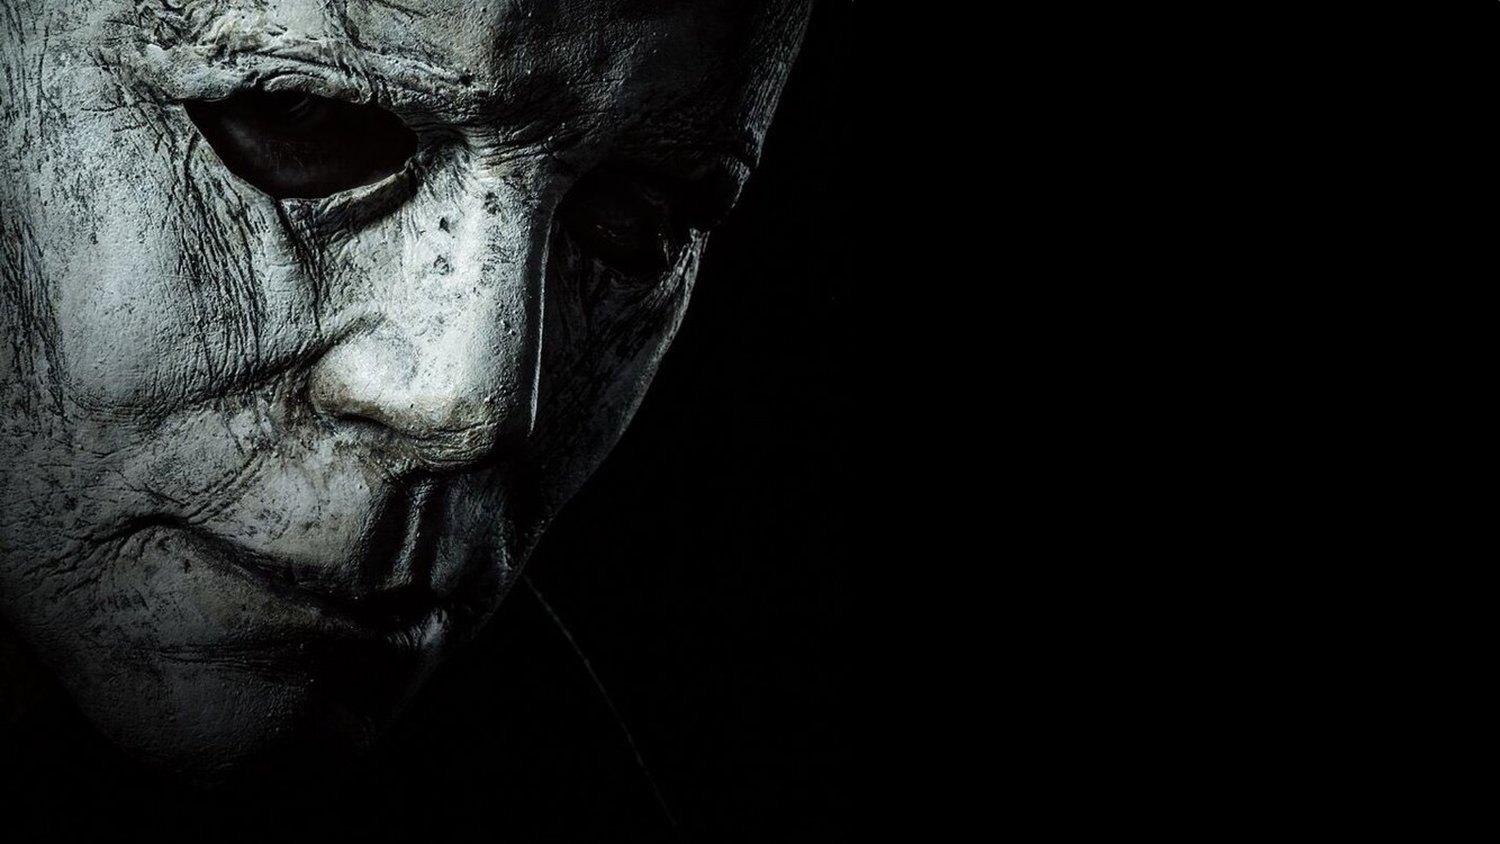 Producer Jason Blum Hinting Big Promises about Halloween Kills, Check Here Report